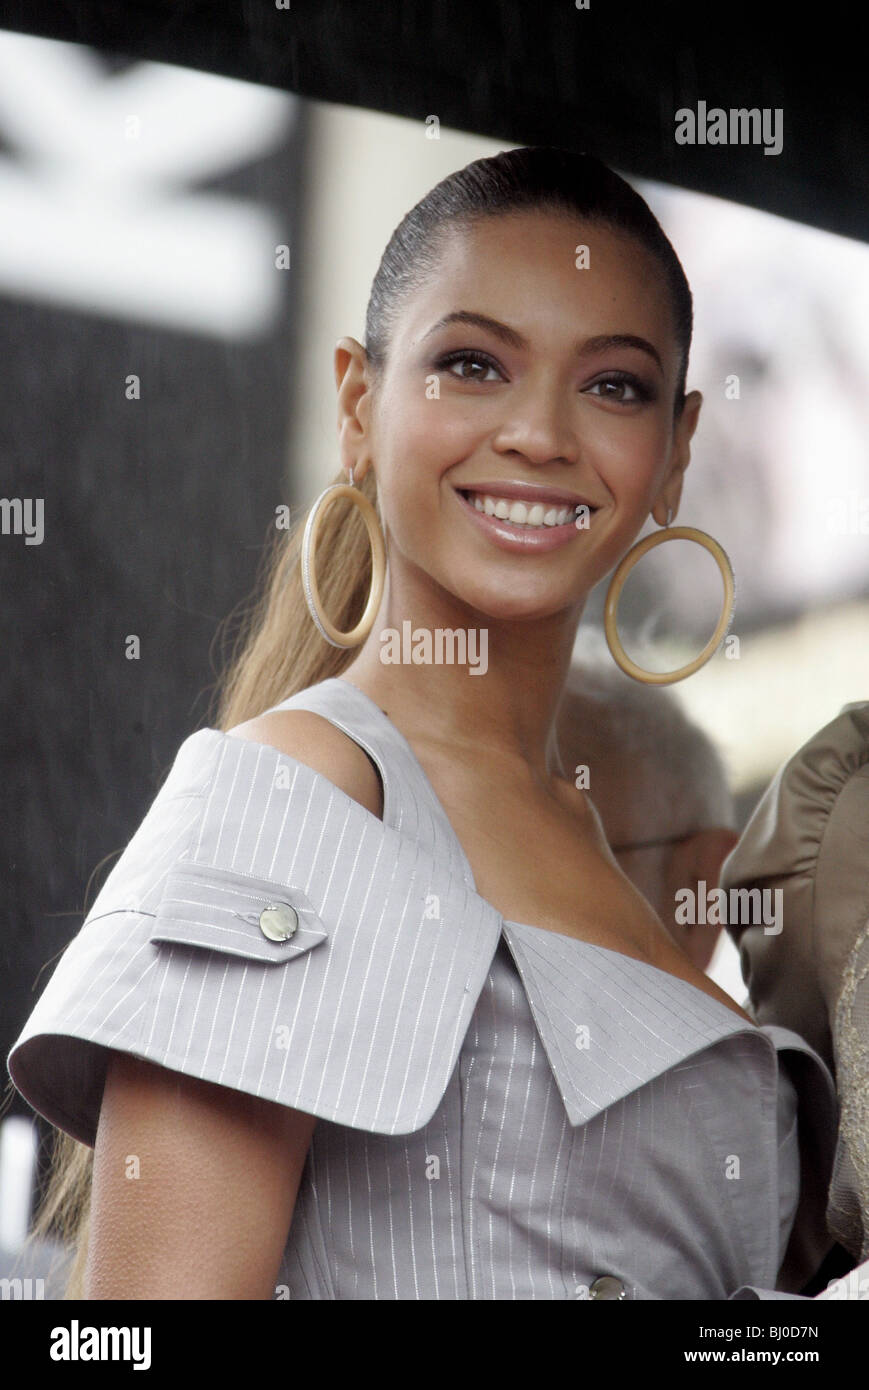 BEYONCE KNOWLES SINGER WALK OF FAME  HOLLYWOOD  LOS ANGELES  USA 28/03/2006 Stock Photo